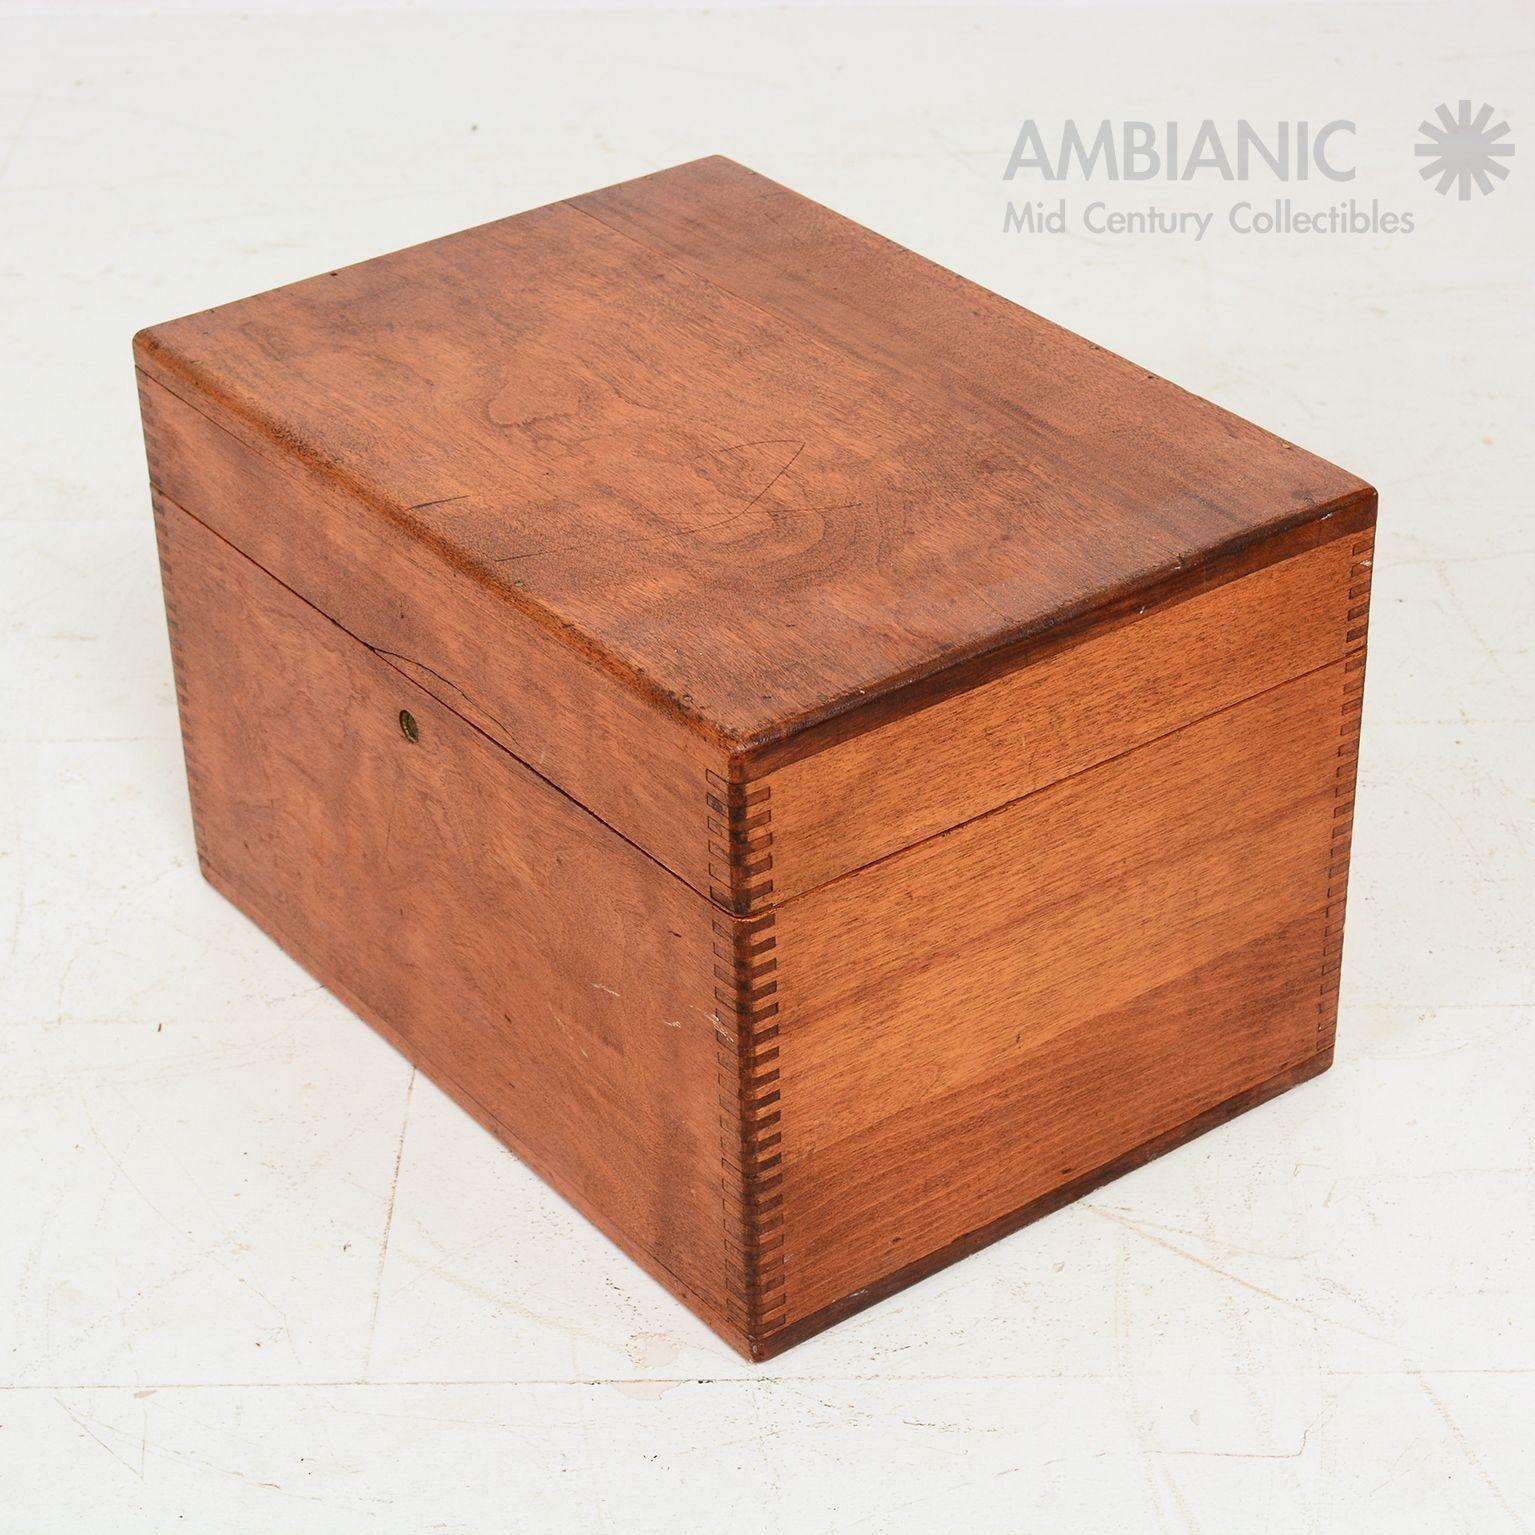 An antique coin cash money box with multiple storage compartments in the drawer tray. Solid maple wood. Constructed with box joints in the corner. No original key  is available.
Dimensions: 14